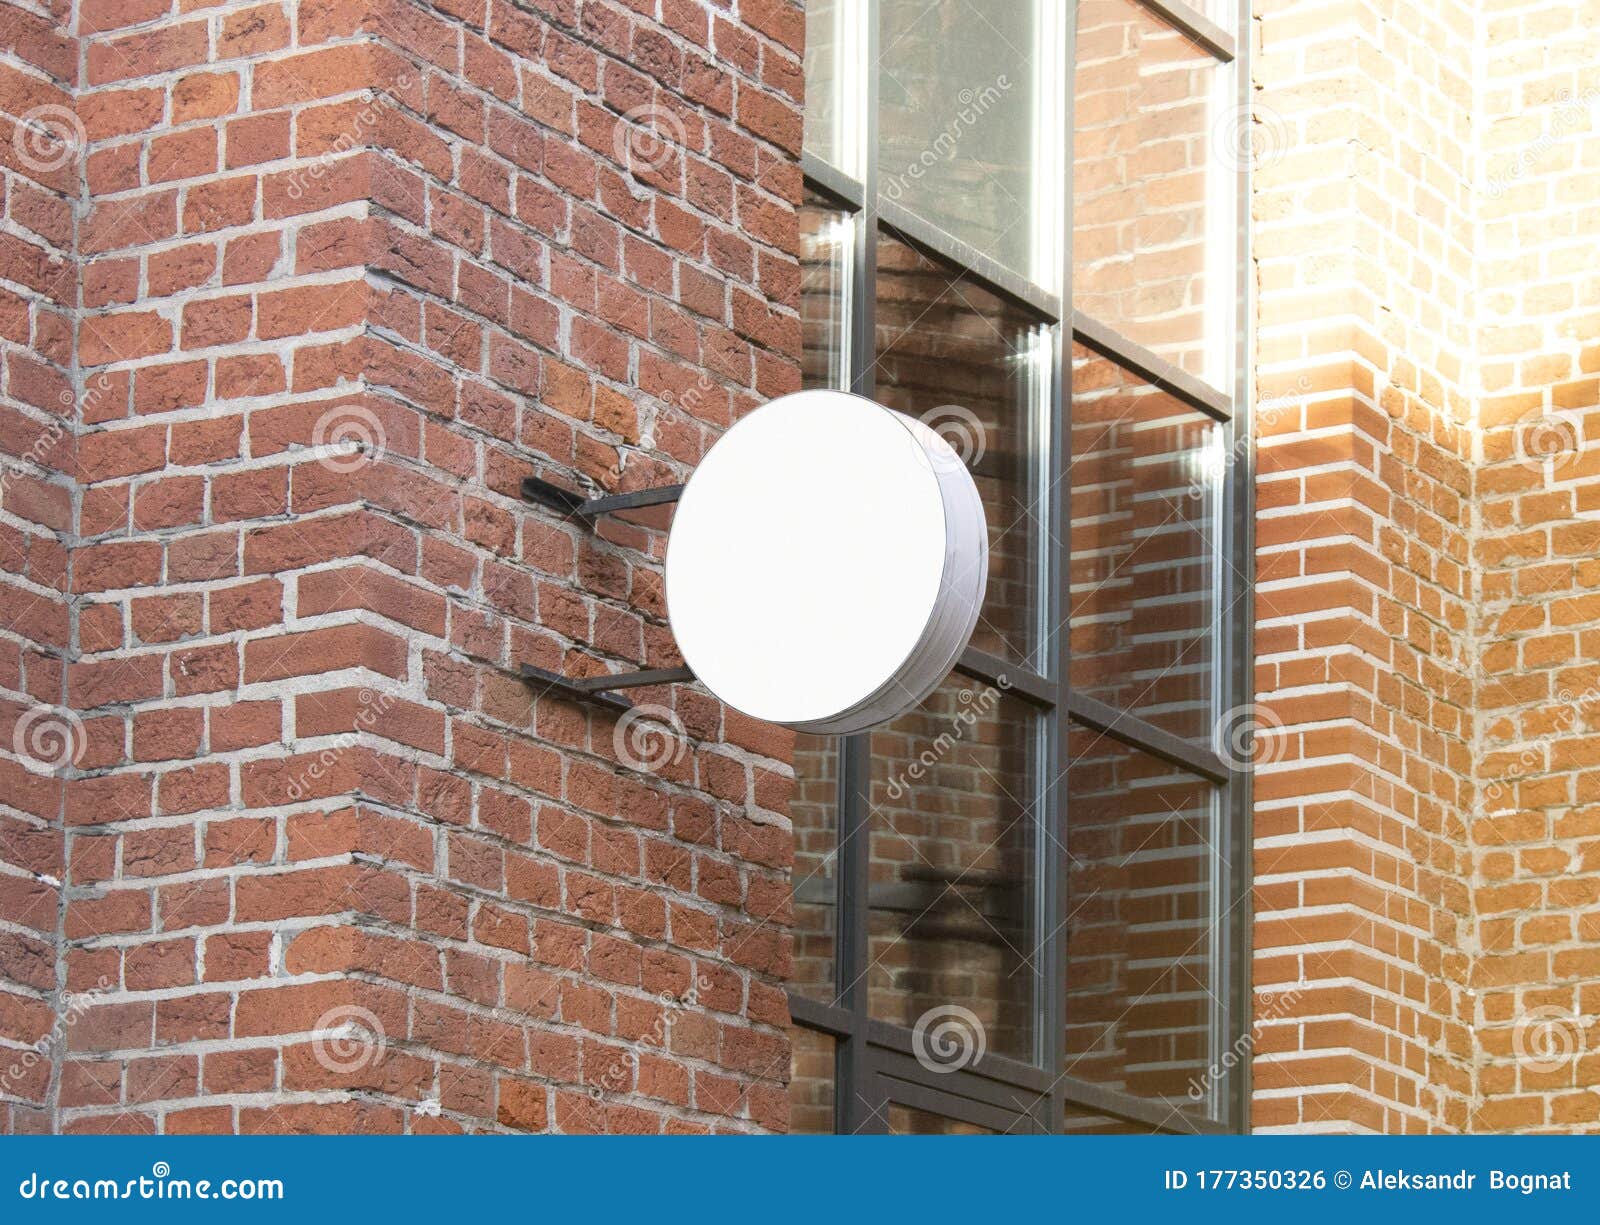 Download Blank White Outdoor Round Box Mock Up Brick Wall Mounted ...